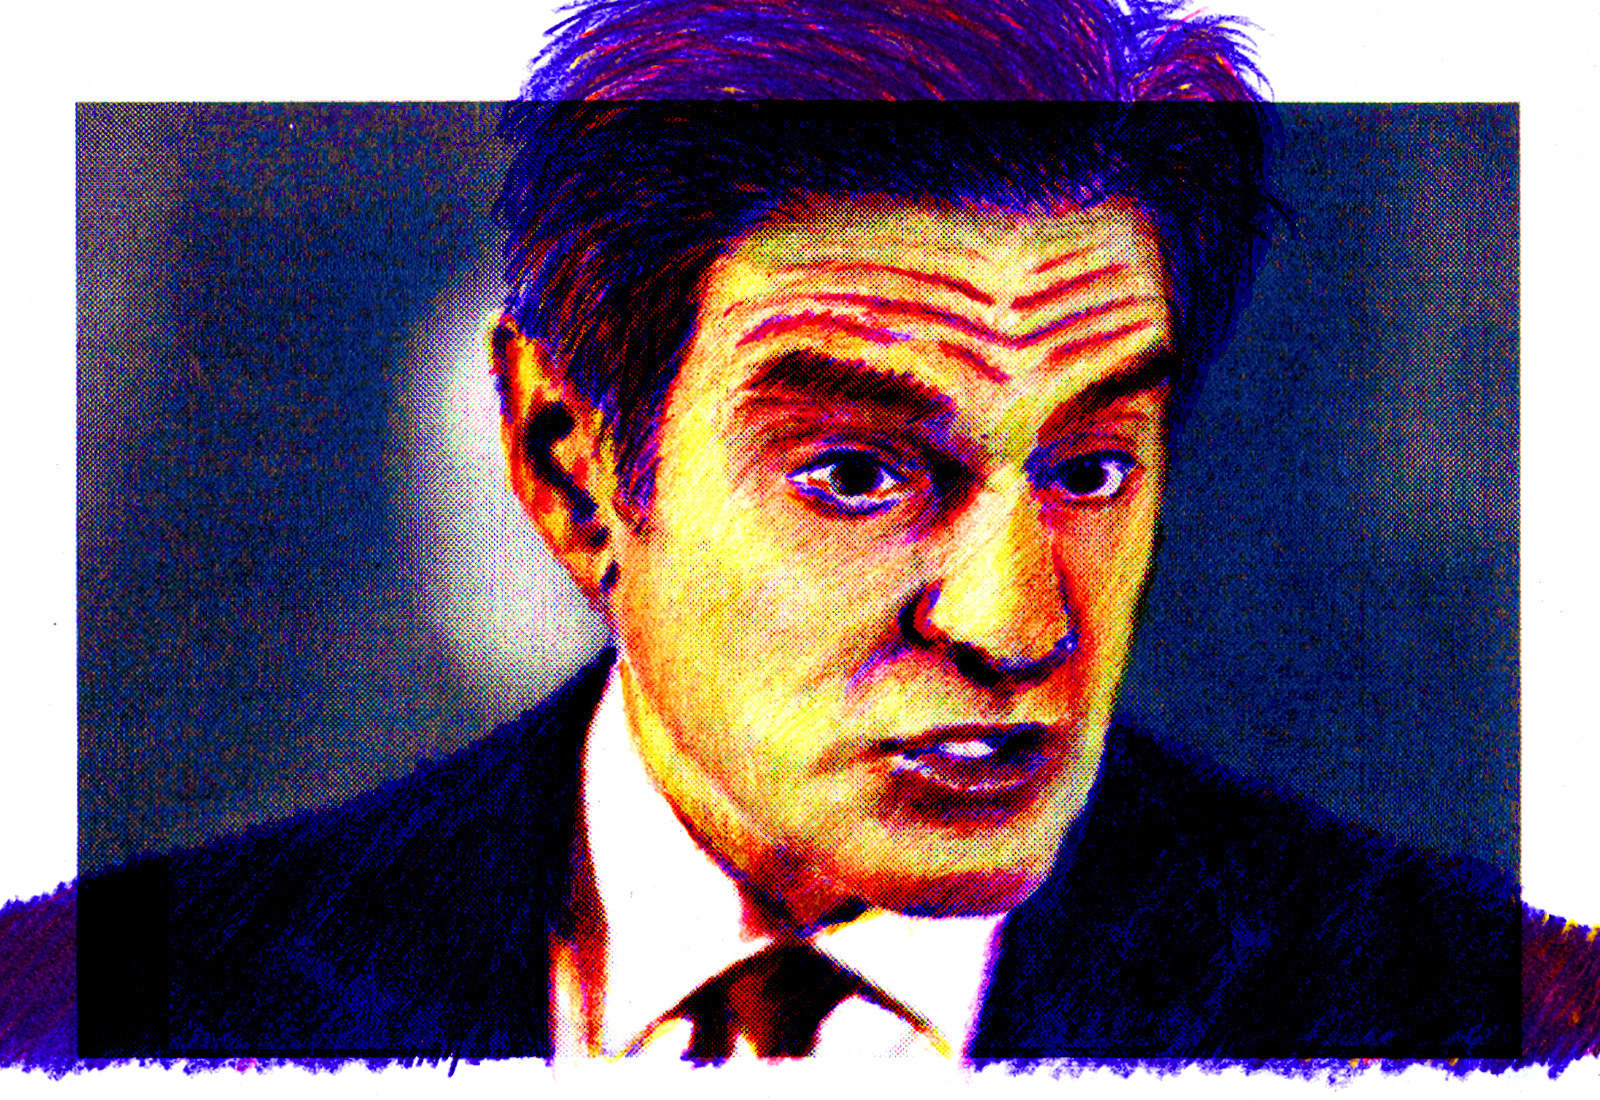 An illustration of Dr. Oz in a suit from the shoulders up